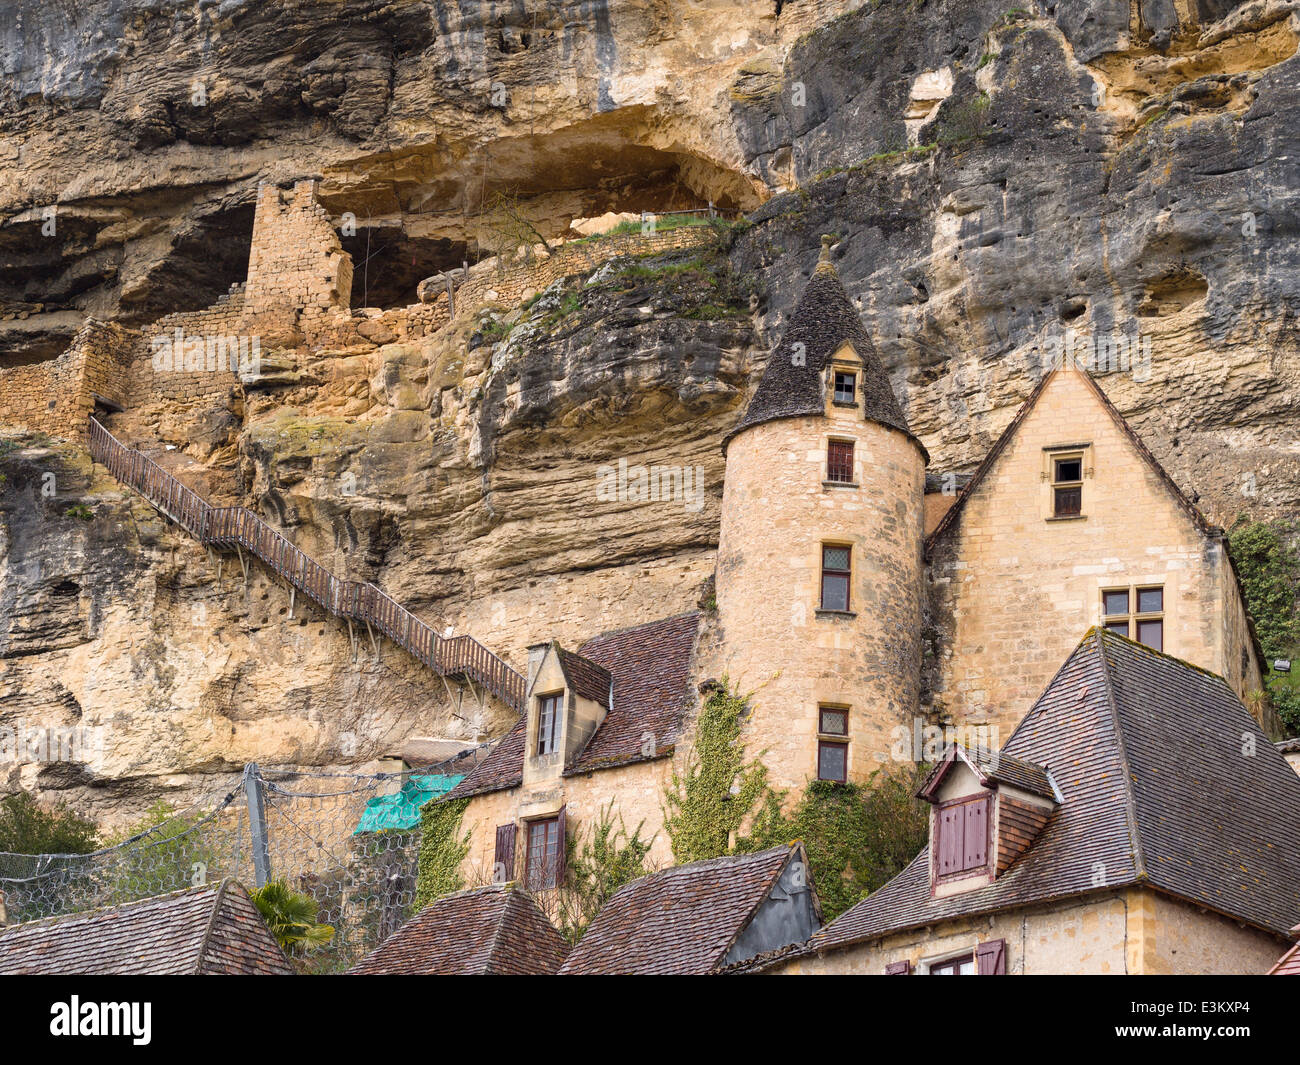 Caves above the fine houses of the lower village of La Roche. A rickety old wooden stair connects the towered houses to caves Stock Photo